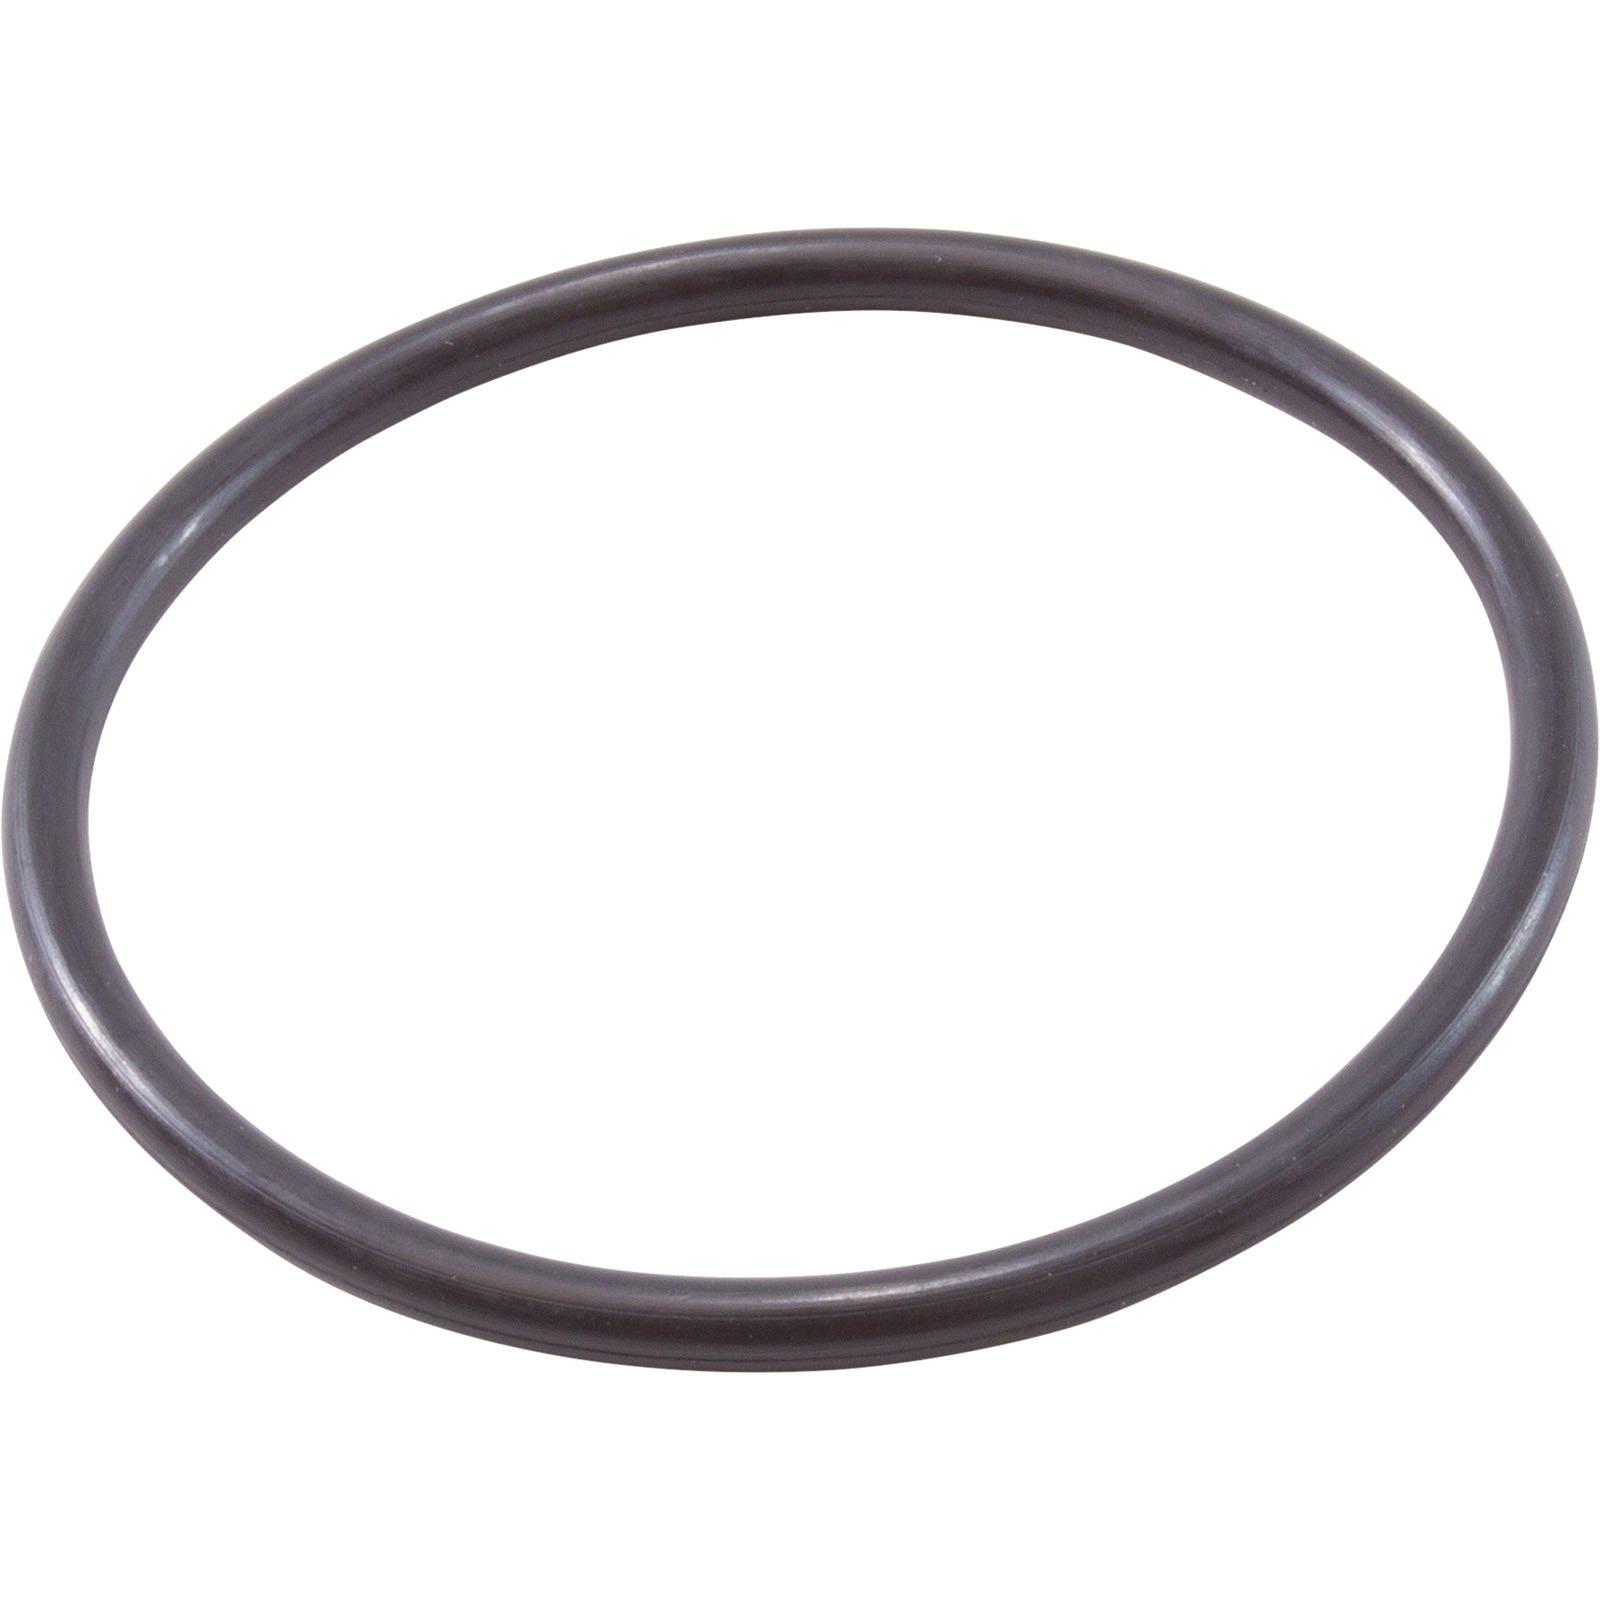 All Seals  Replacement Union O-Ring for Hayward Power-Flo